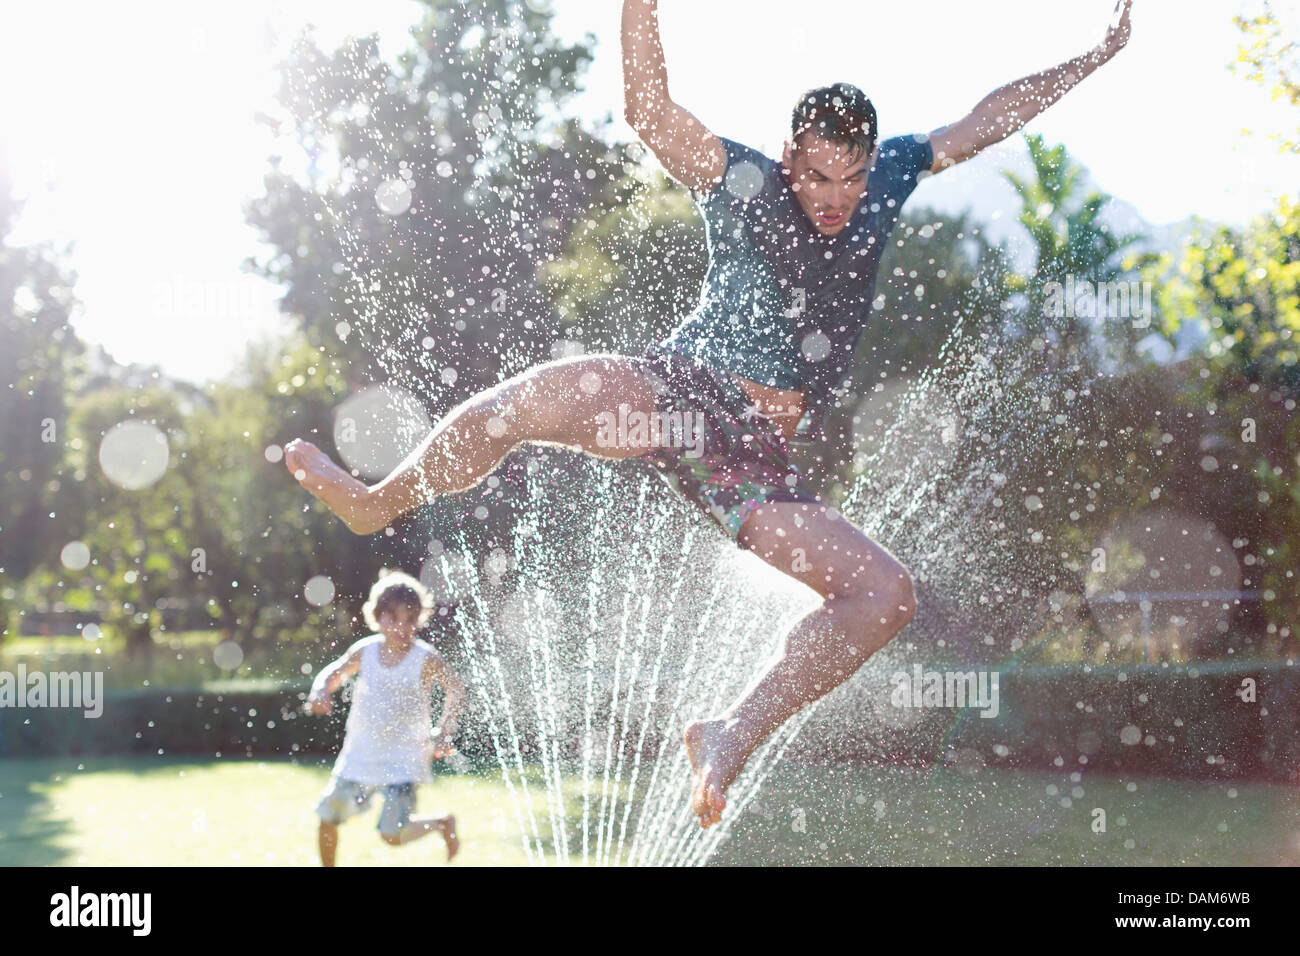 Father and son playing in sprinkler in backyard Stock Photo